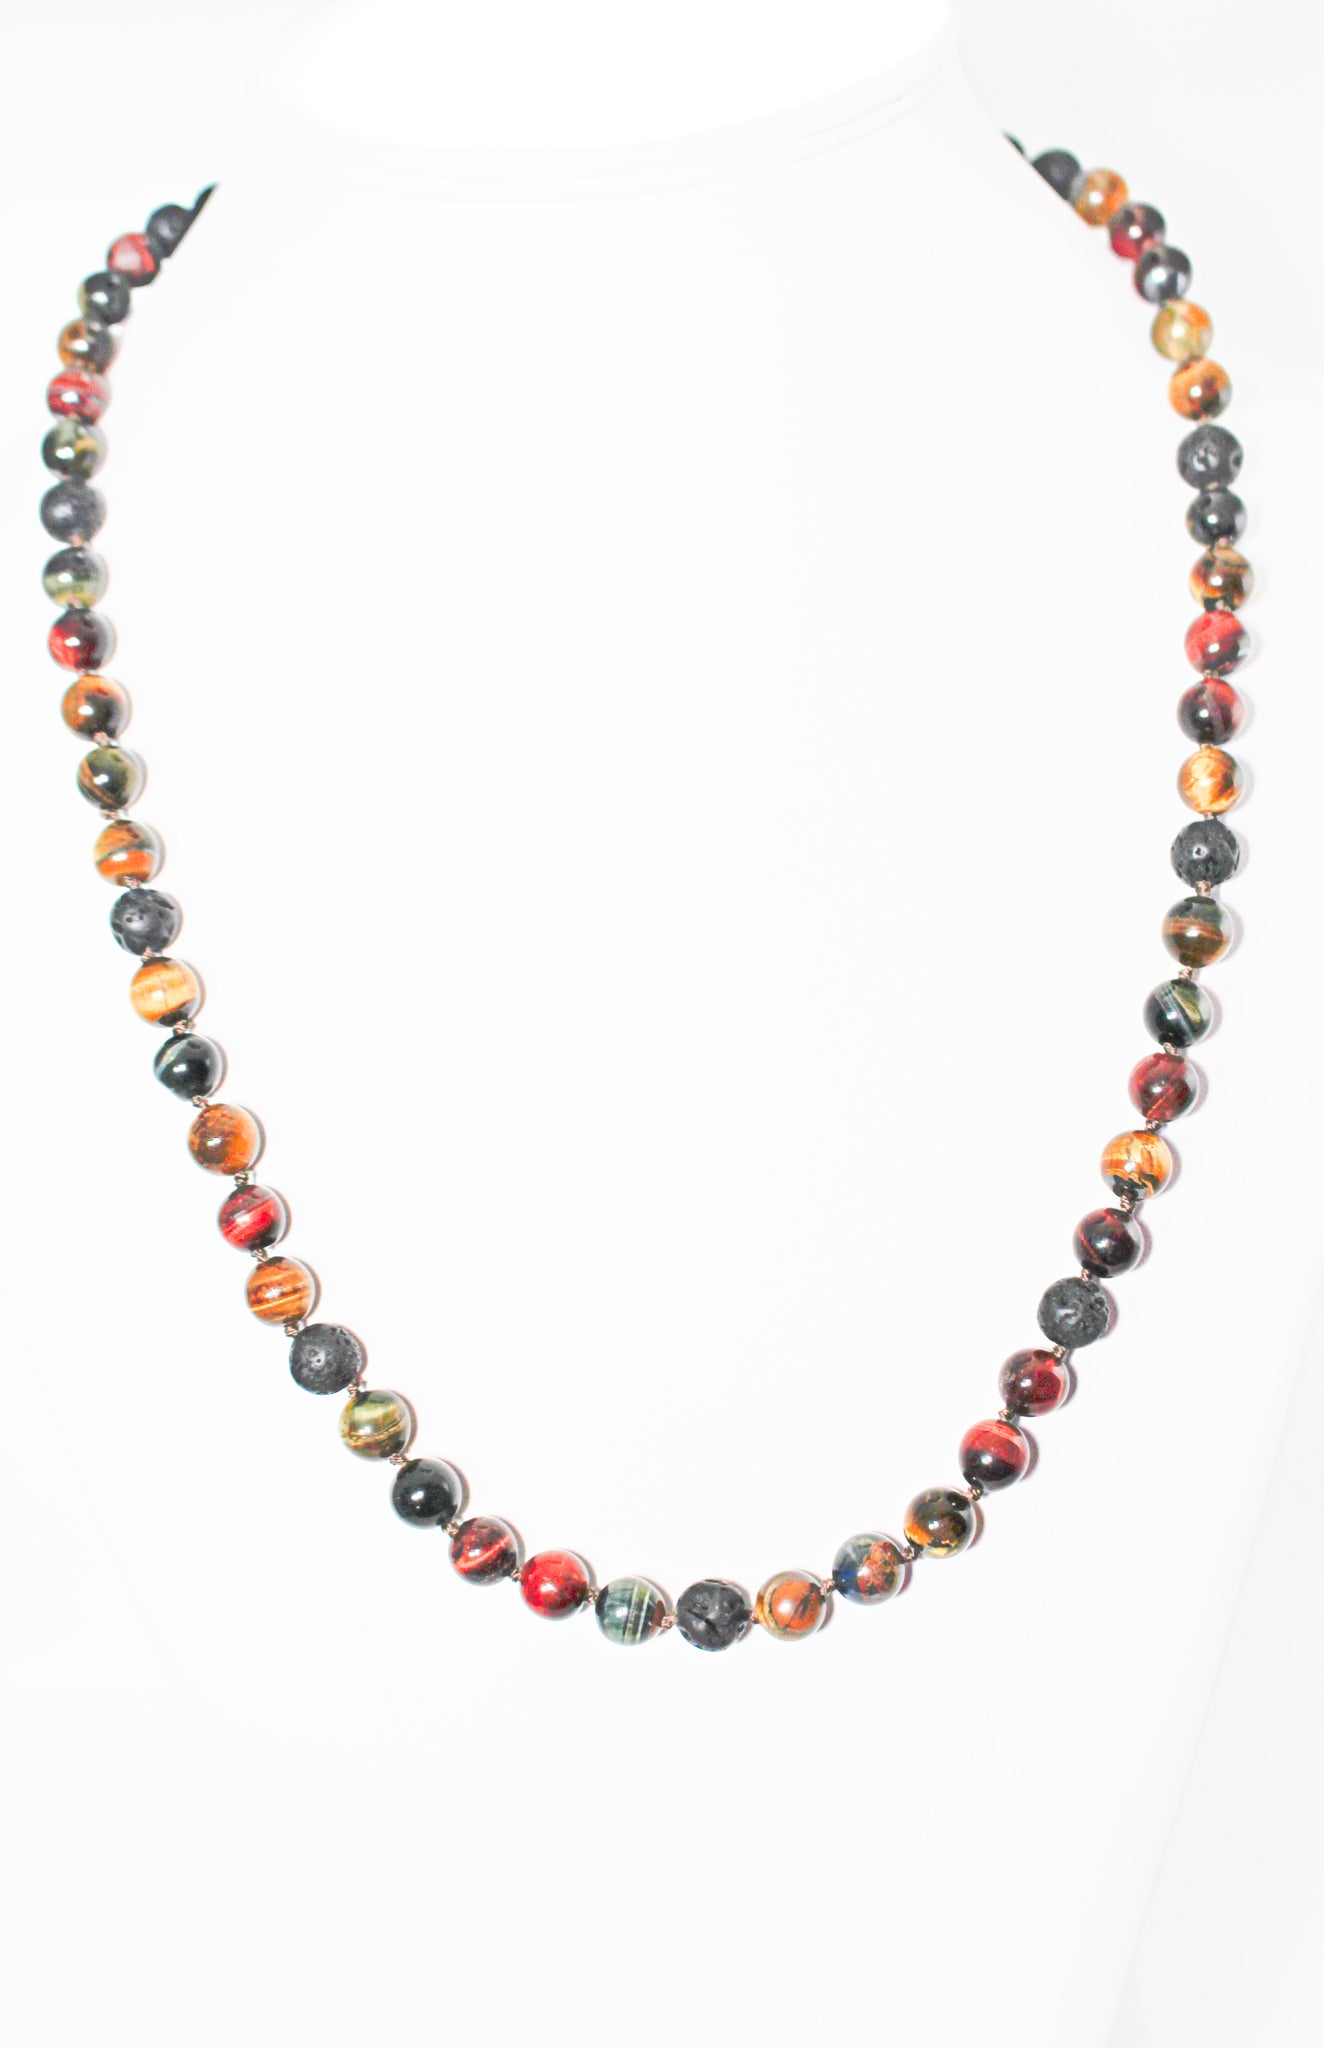 KD-0107 Knotted Tiger's Eye and Lava Necklace